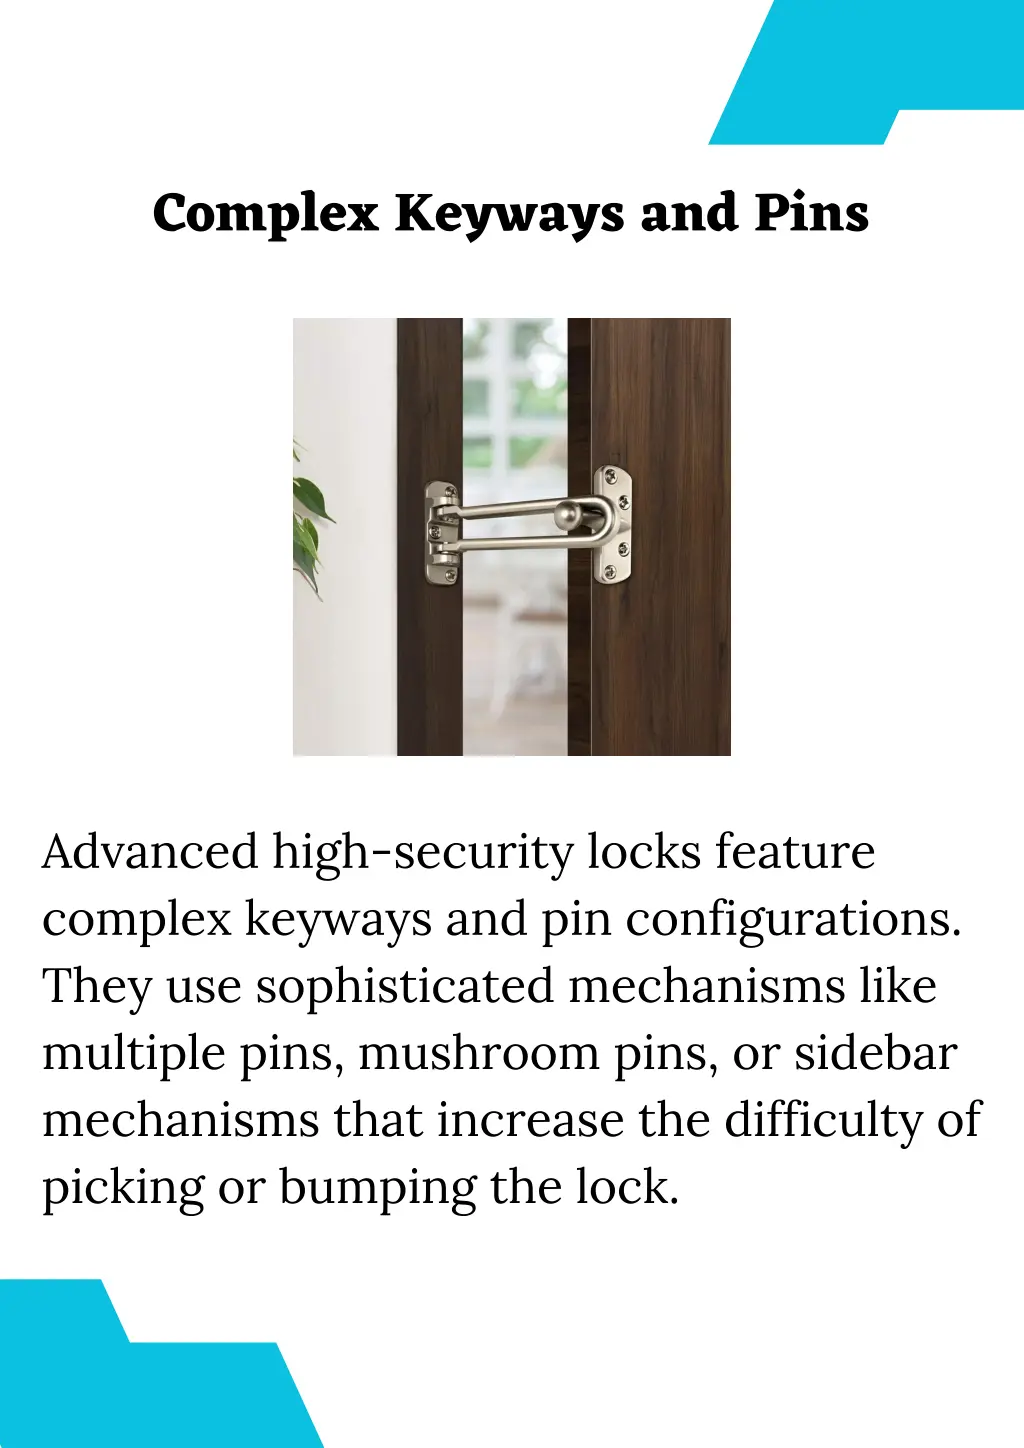 complex keyways and pins